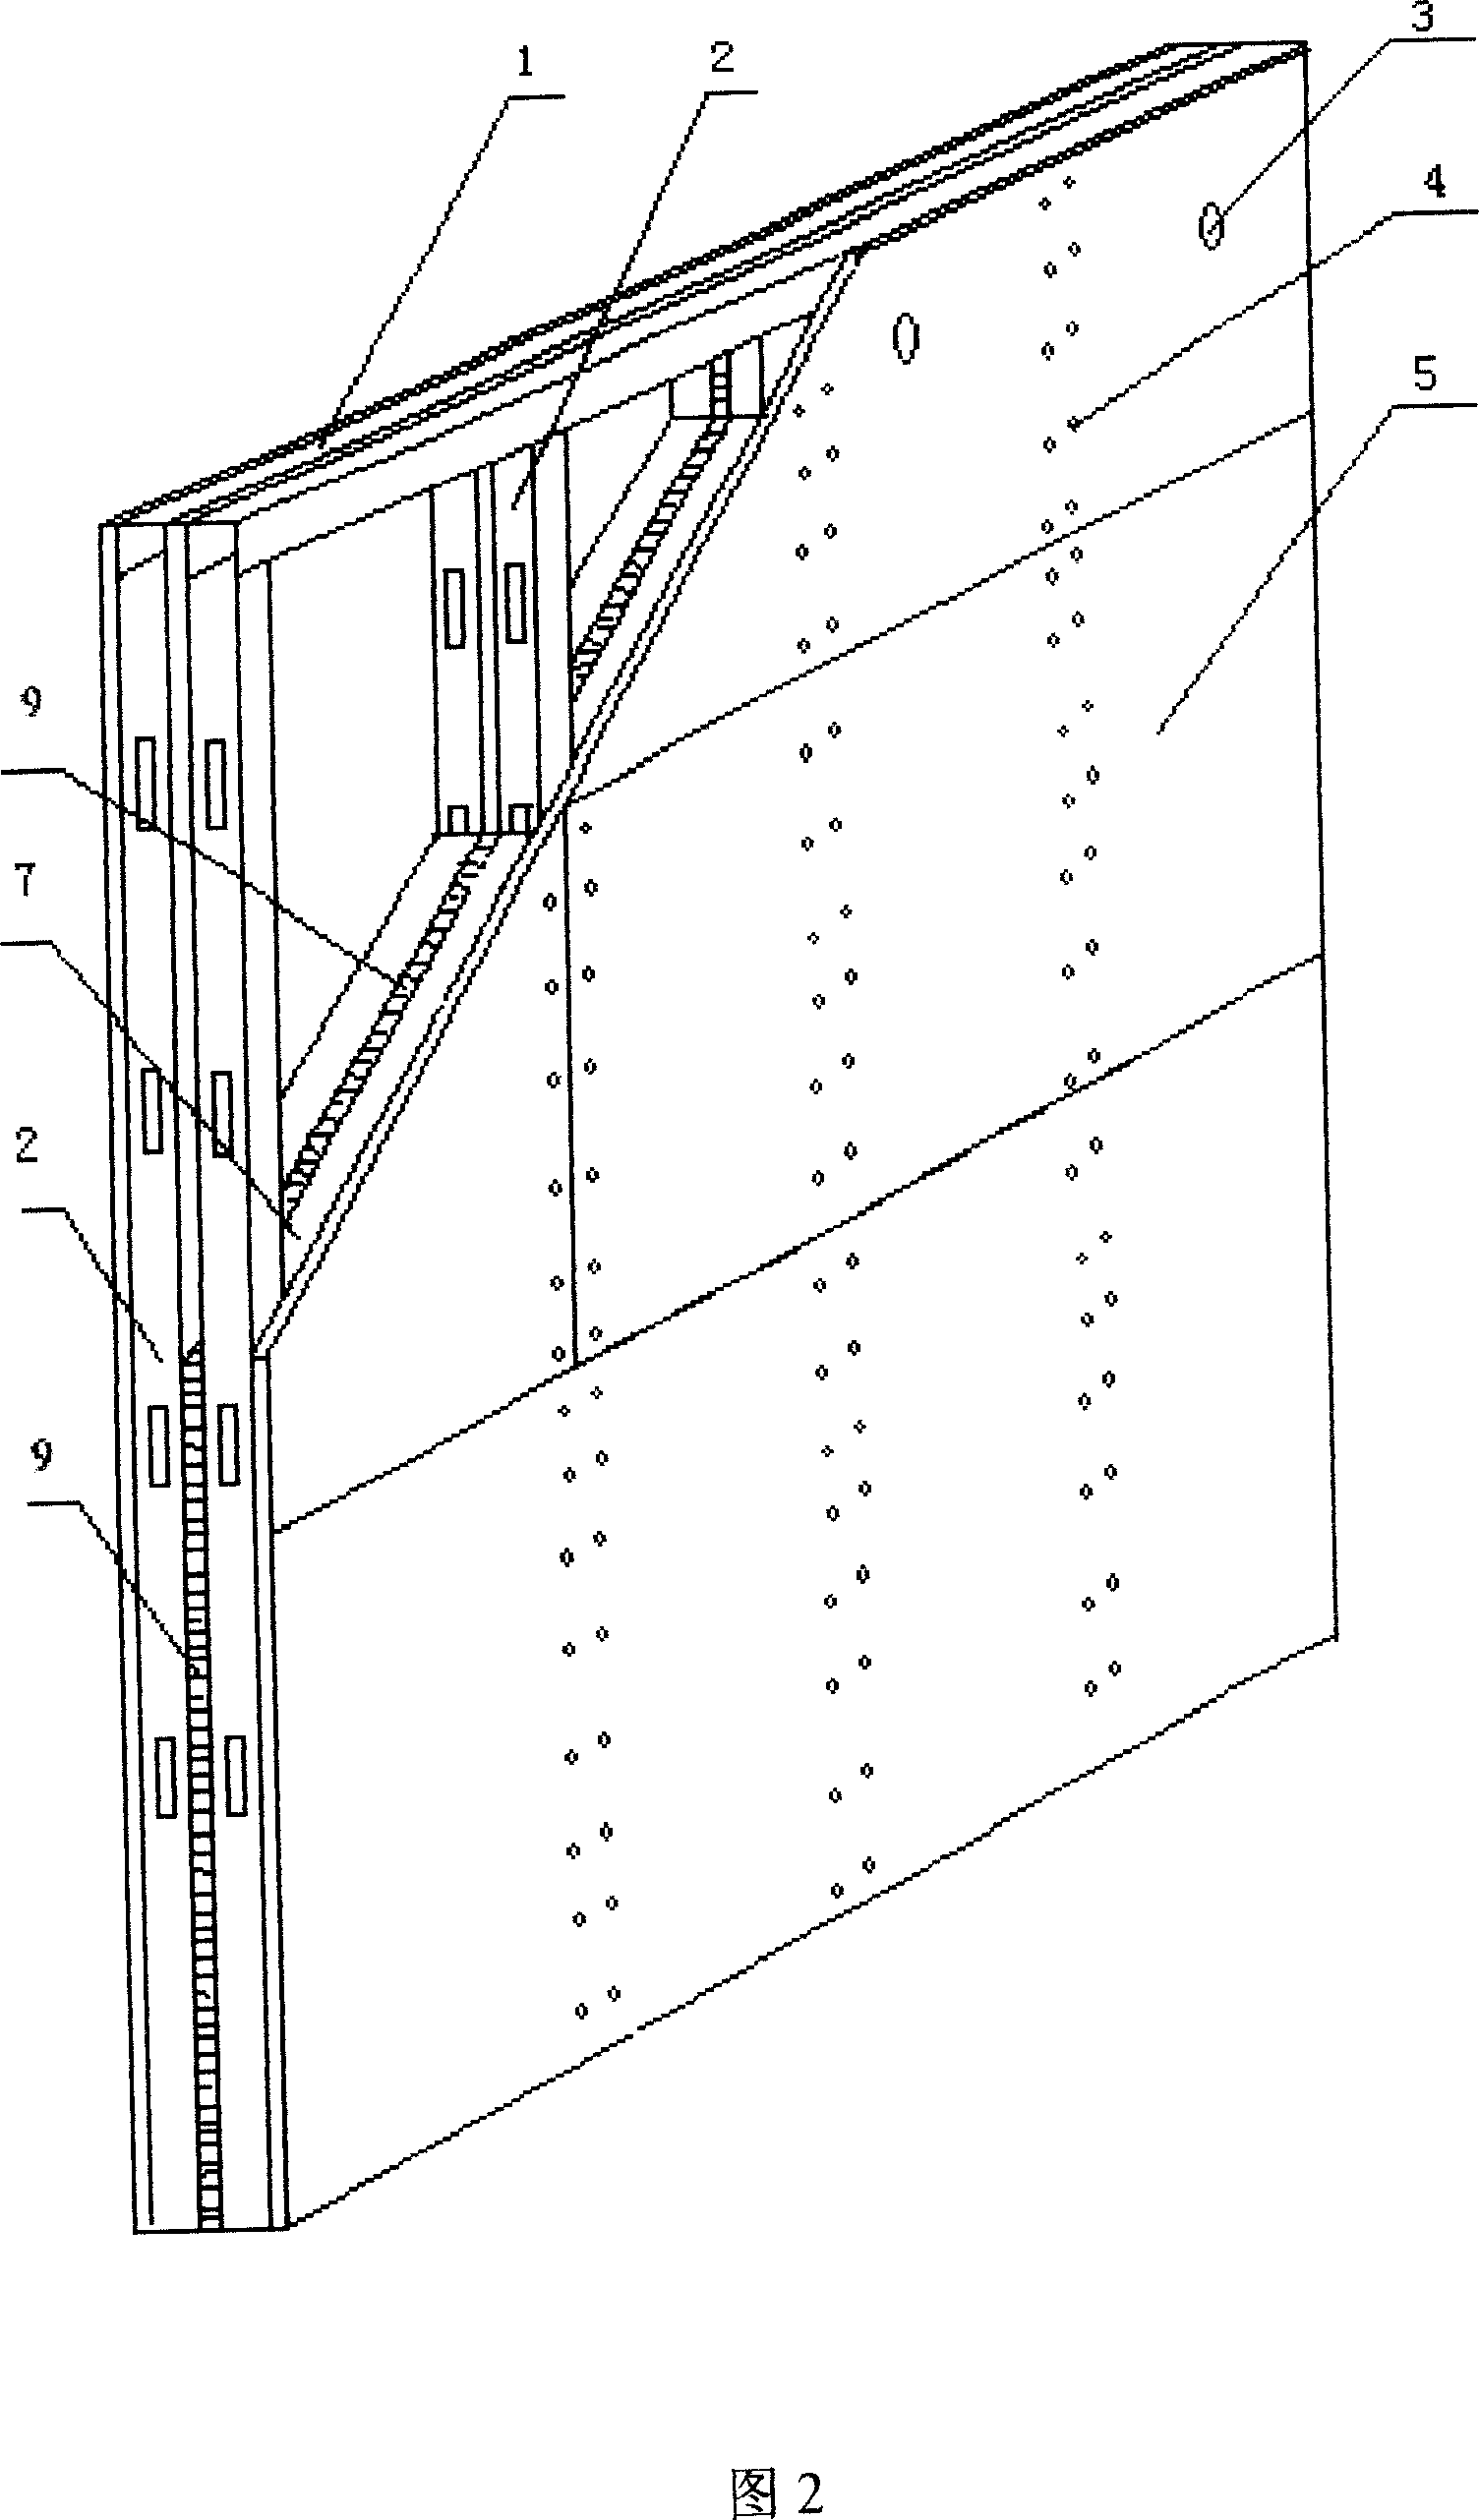 Non-load-bearing lightgage steel joist isolation wall and its construction method